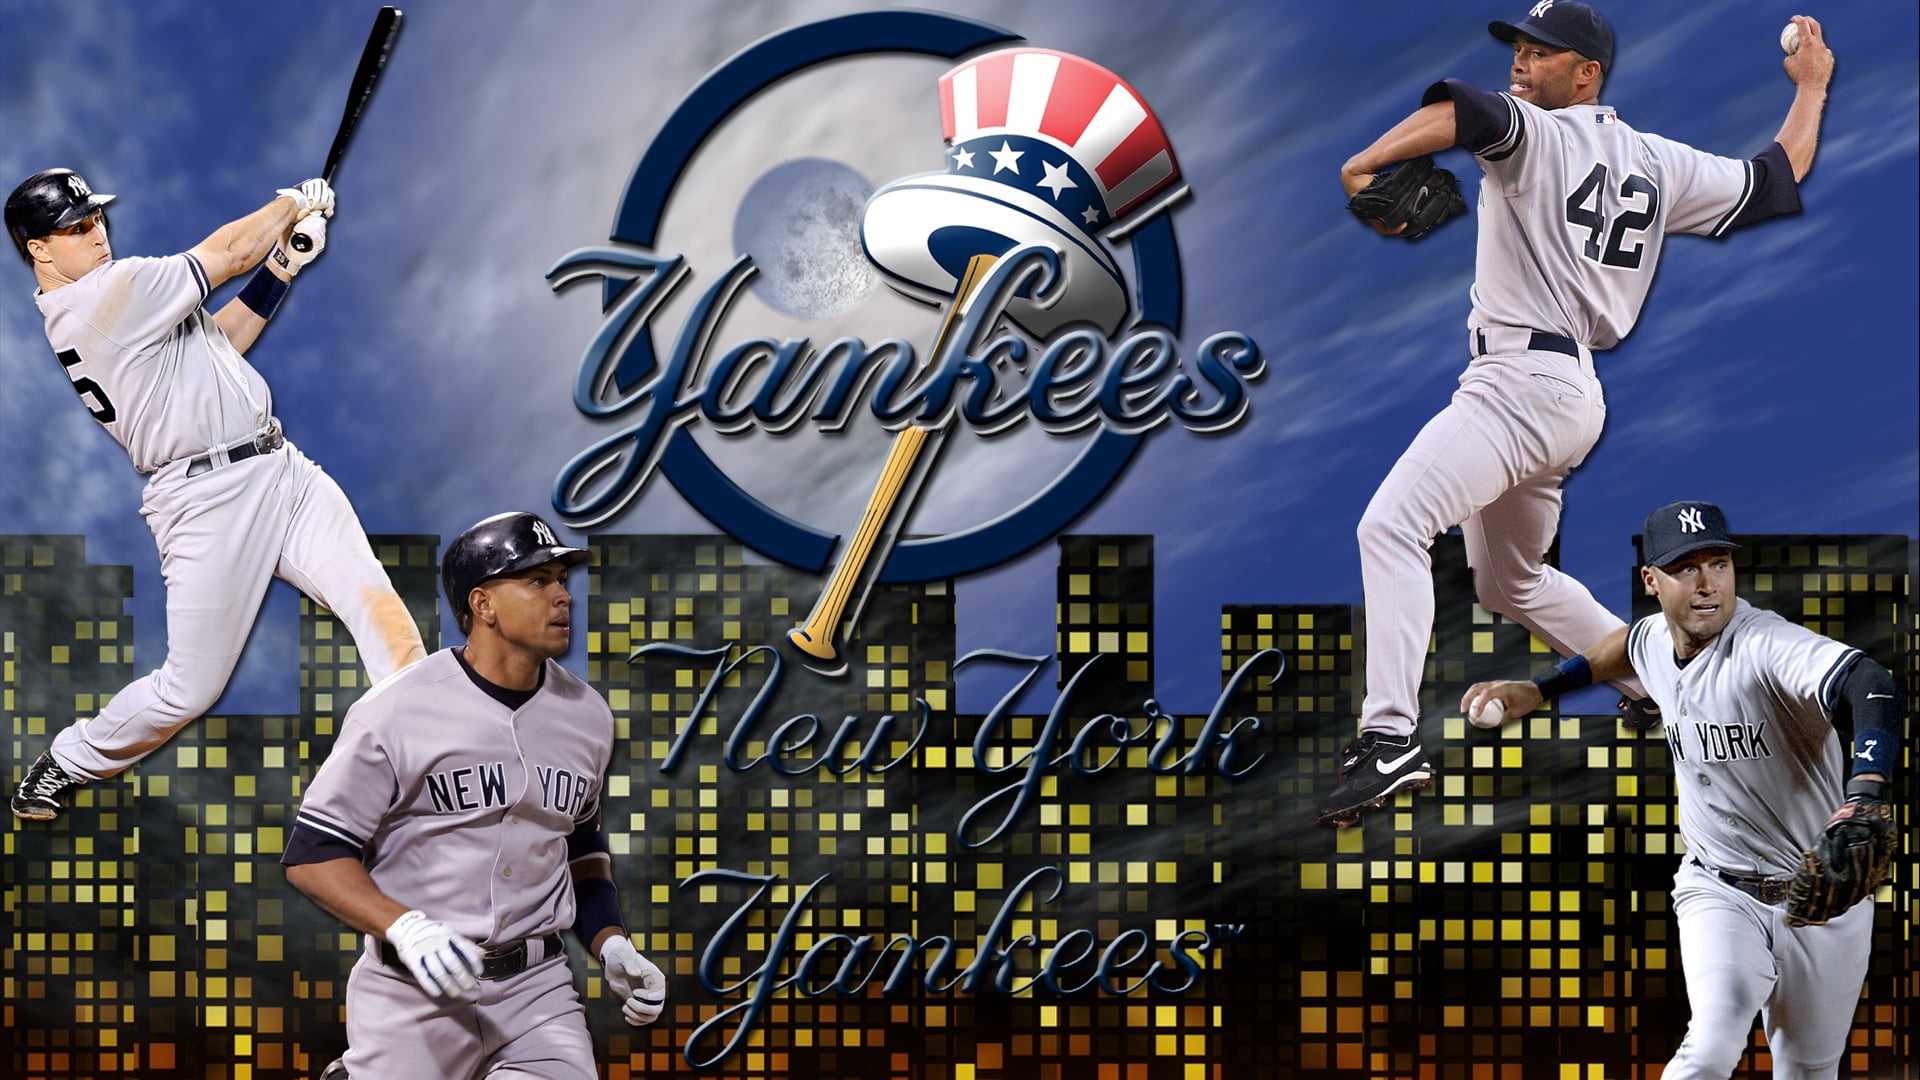 New York Yankees wallpaper, 2015, sport, playing, competitive Sport